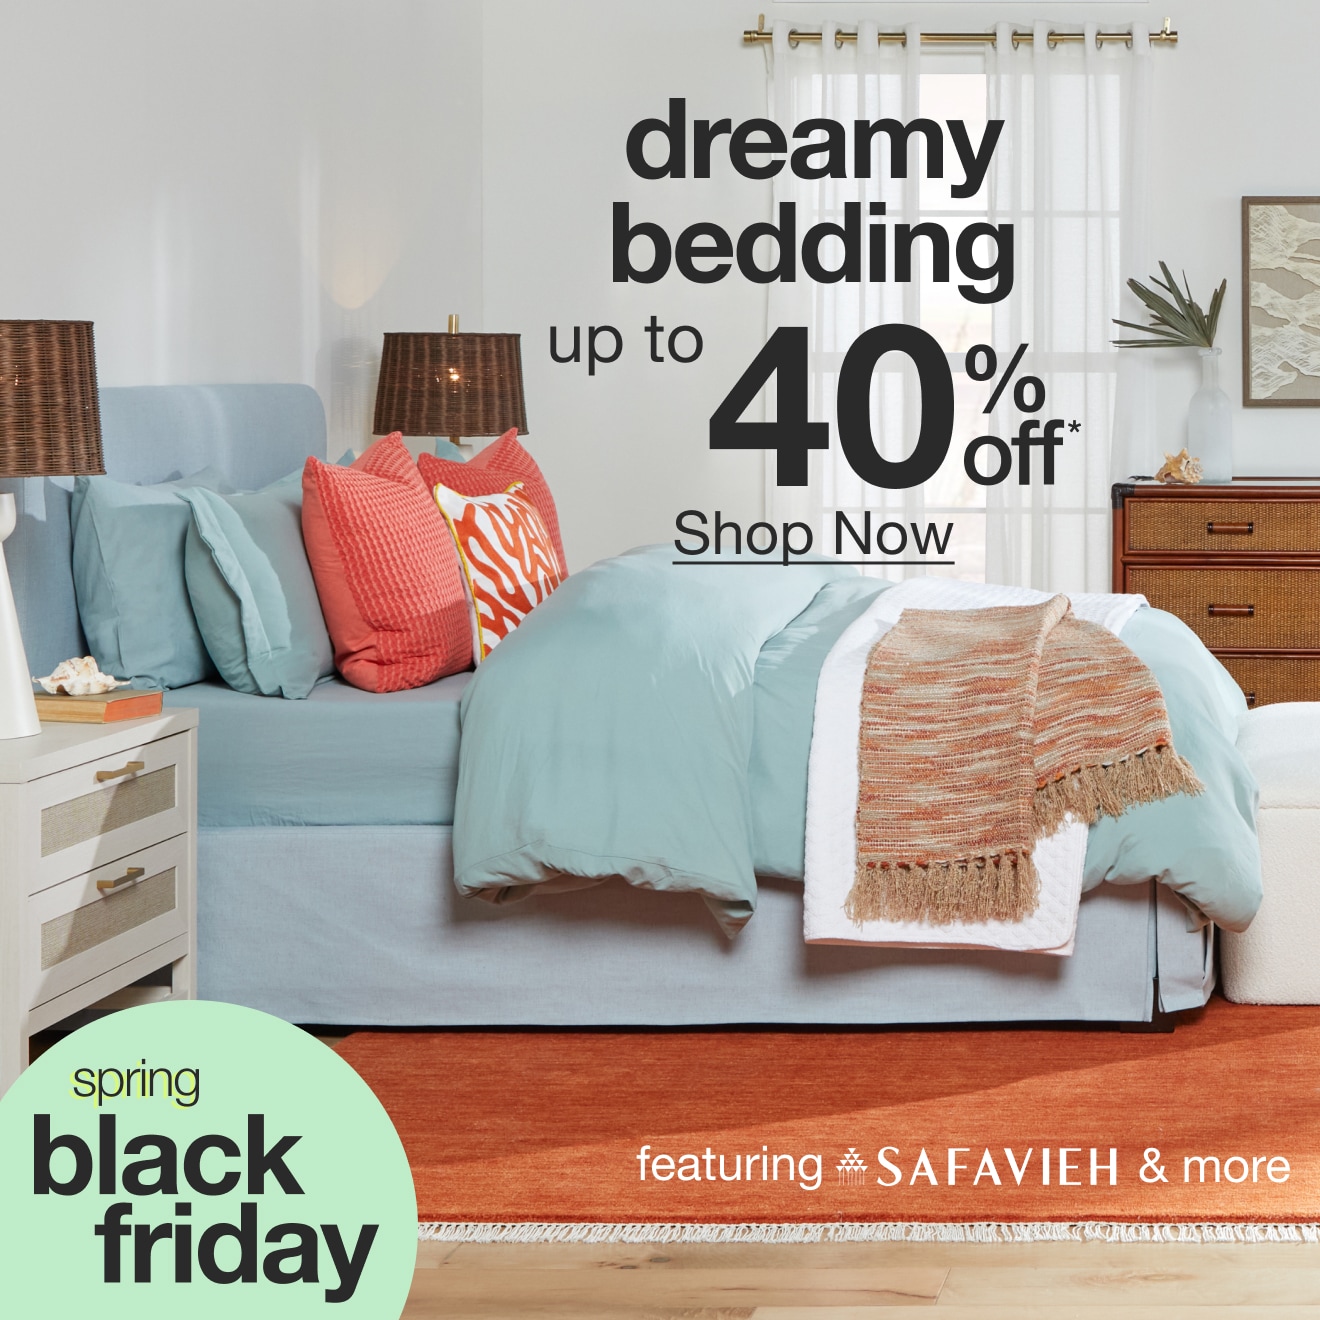 Up to 40% Off Bedding — Shop Now!